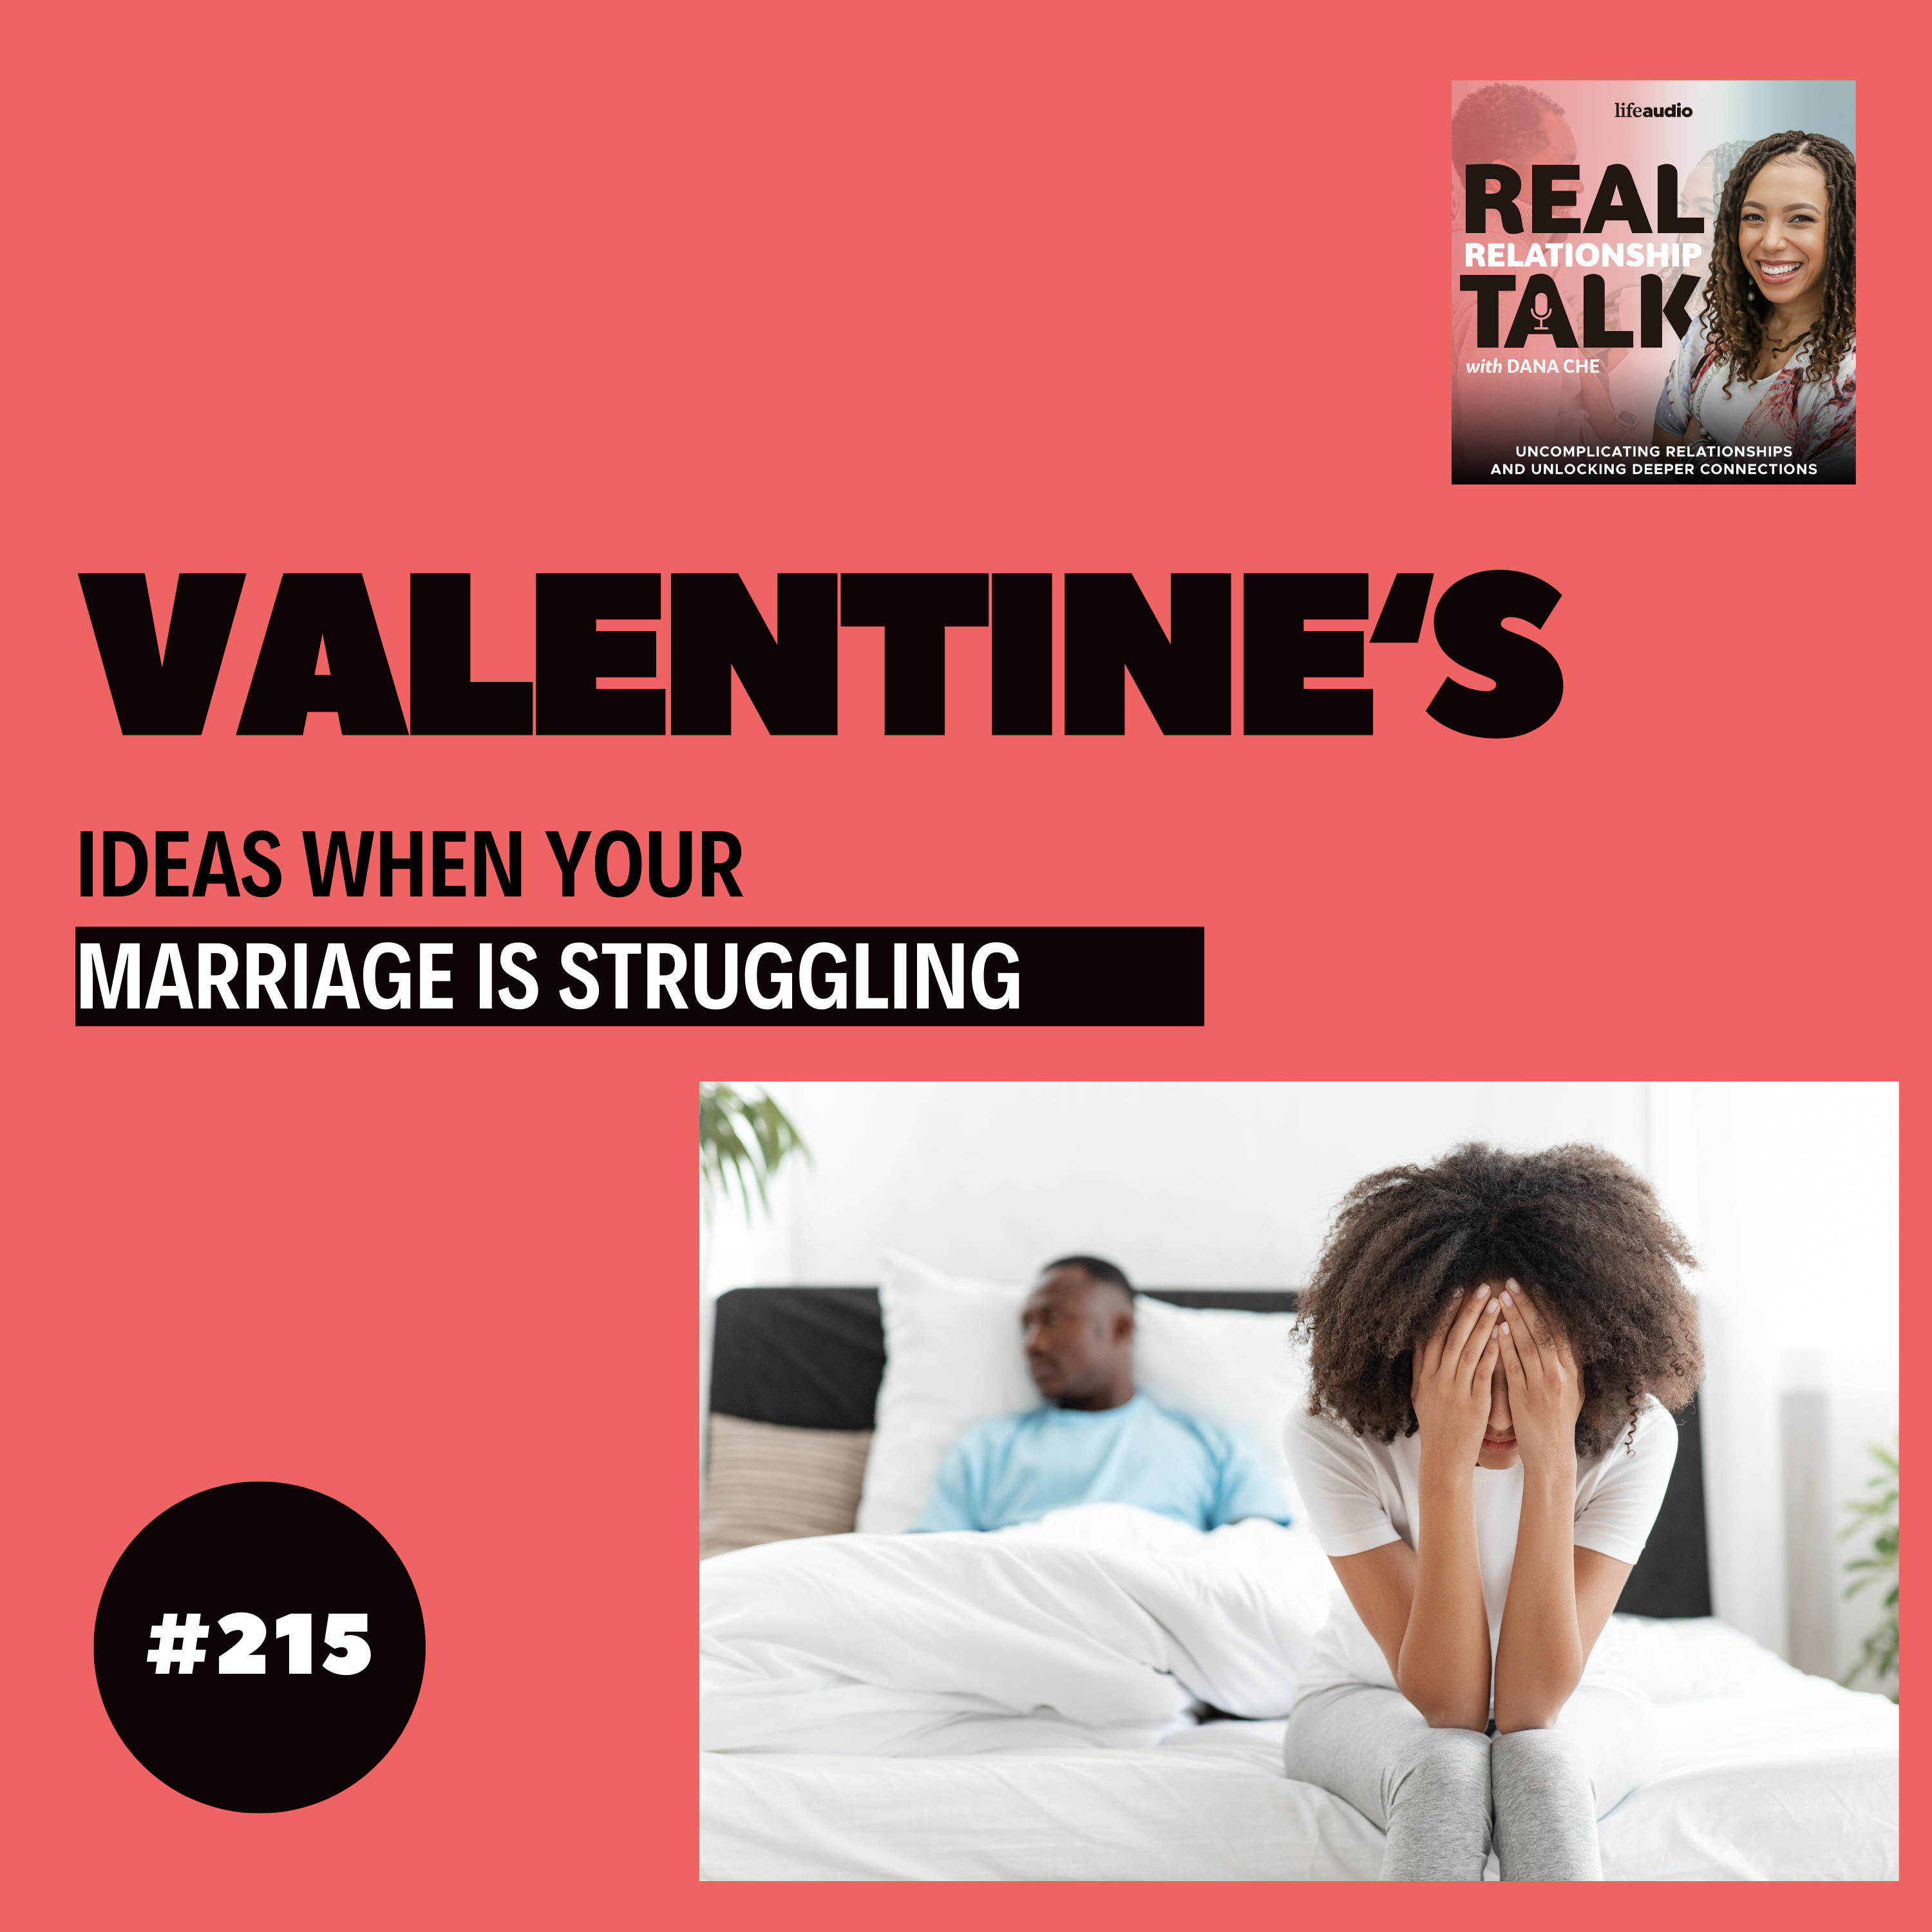 Valentine's Day Solutions for Struggling Marriages: 5 Tips to Reconnection